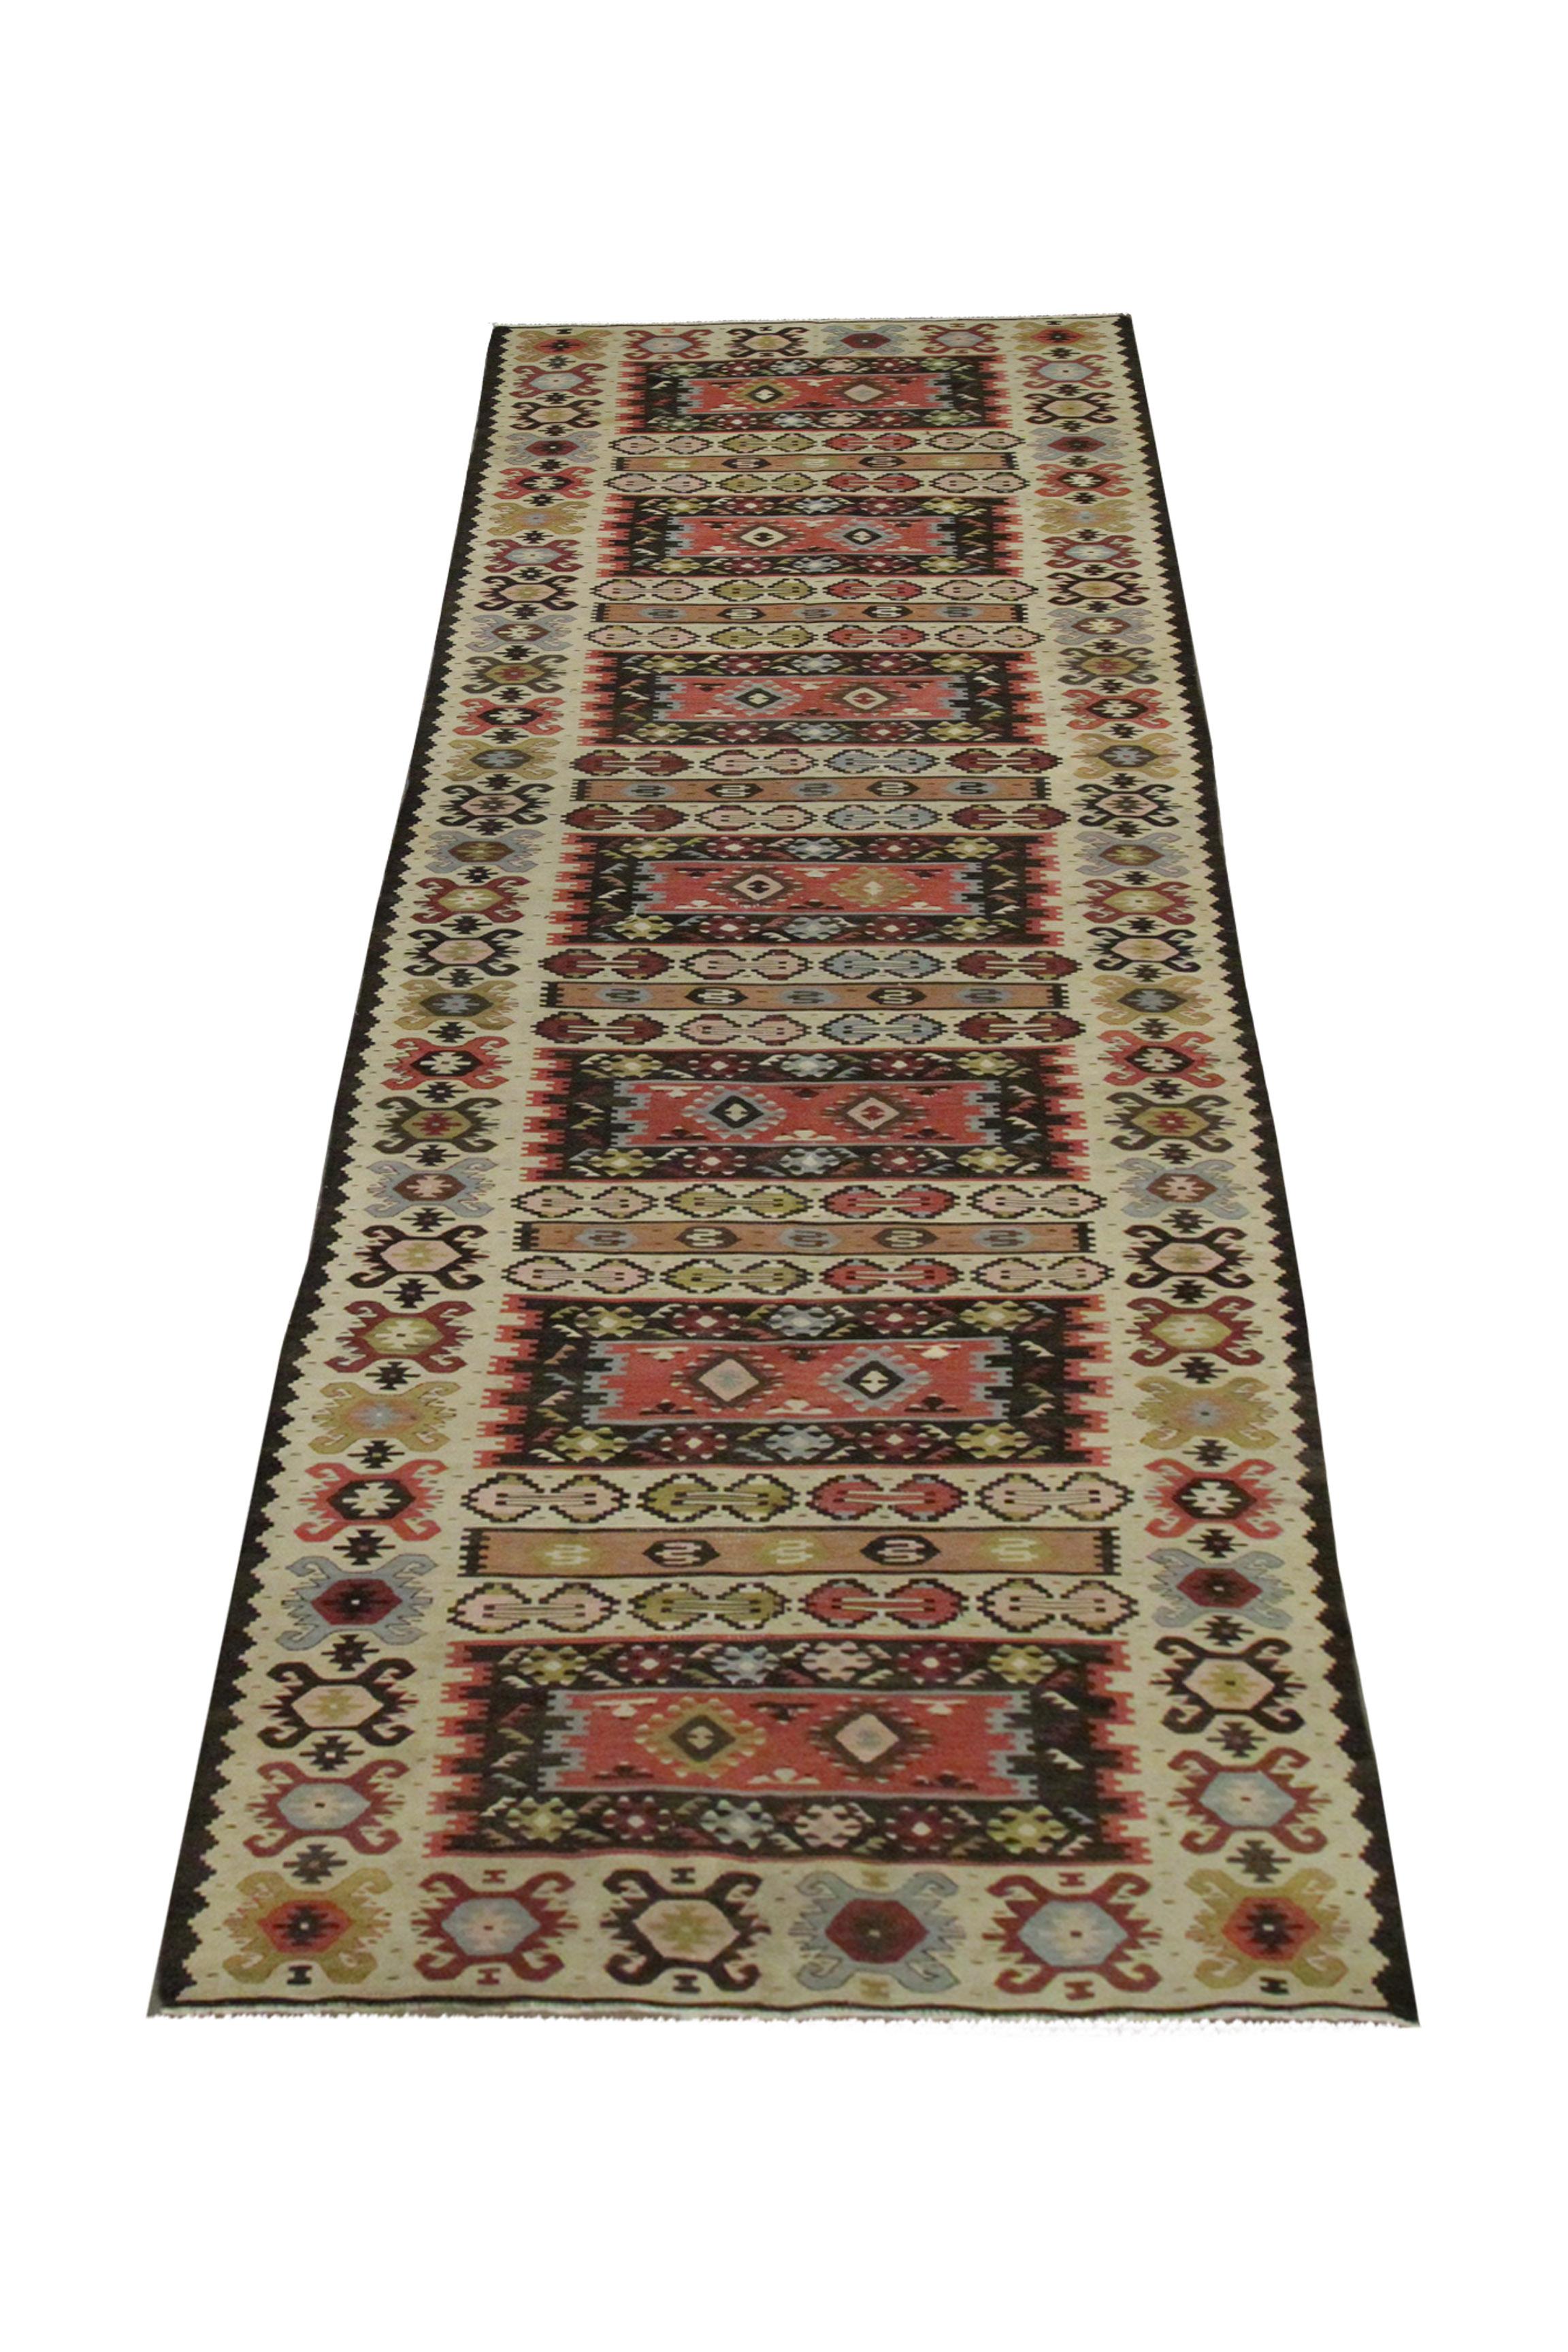 This area rug is a handwoven kilim runner from Sarkoy, Turkey, woven by hand in the 1940s. The design has been woven on a cream background with brown, red, mustard and rust accents that make up the geometric stripe design. The rustic colour palette